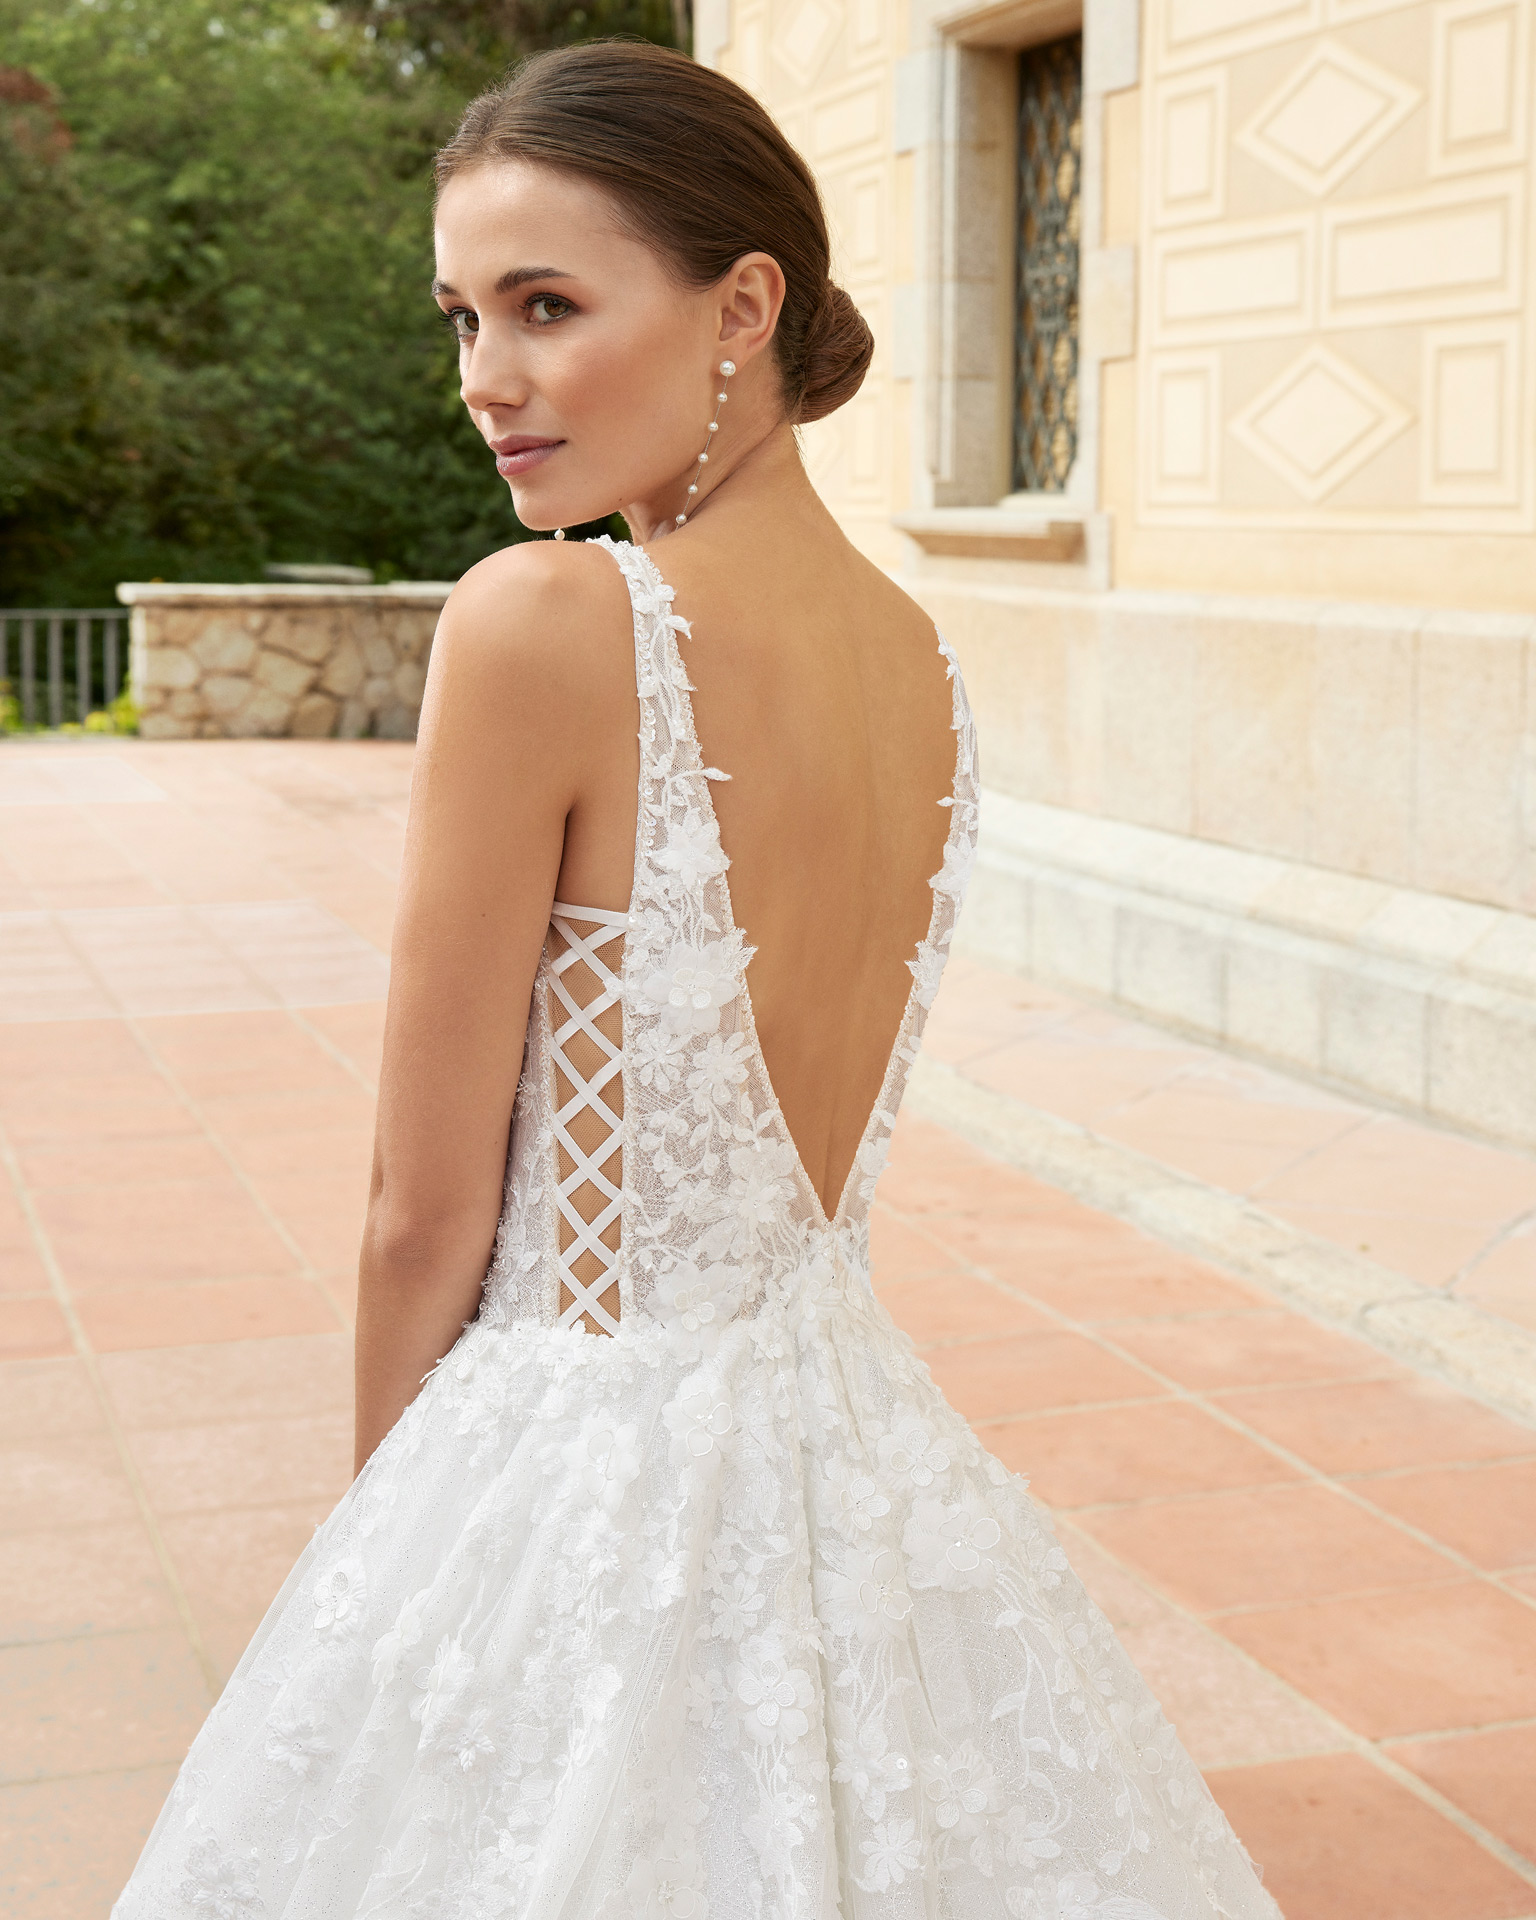 Princess-style A-line wedding dress crafted in lace and beadwork. One of the most delicate Luna Studio designs, it features a tulle skirt, plunging neckline and plunging back. LUNA_NOVIAS.